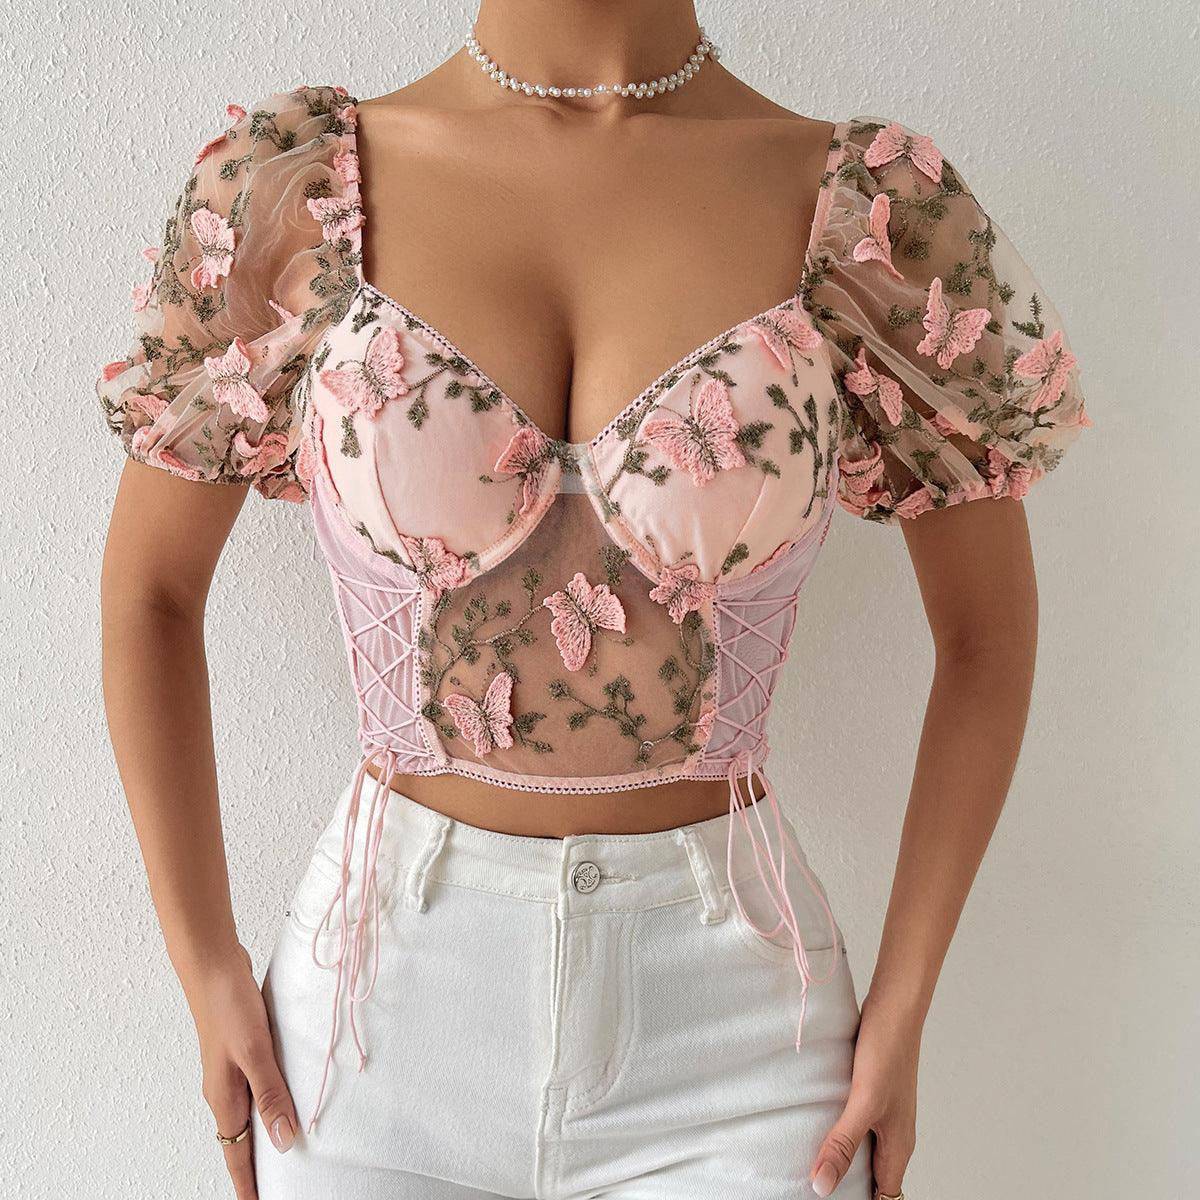 Bailey Butterfly See Through Drawstring Corset Top - Hot fashionista